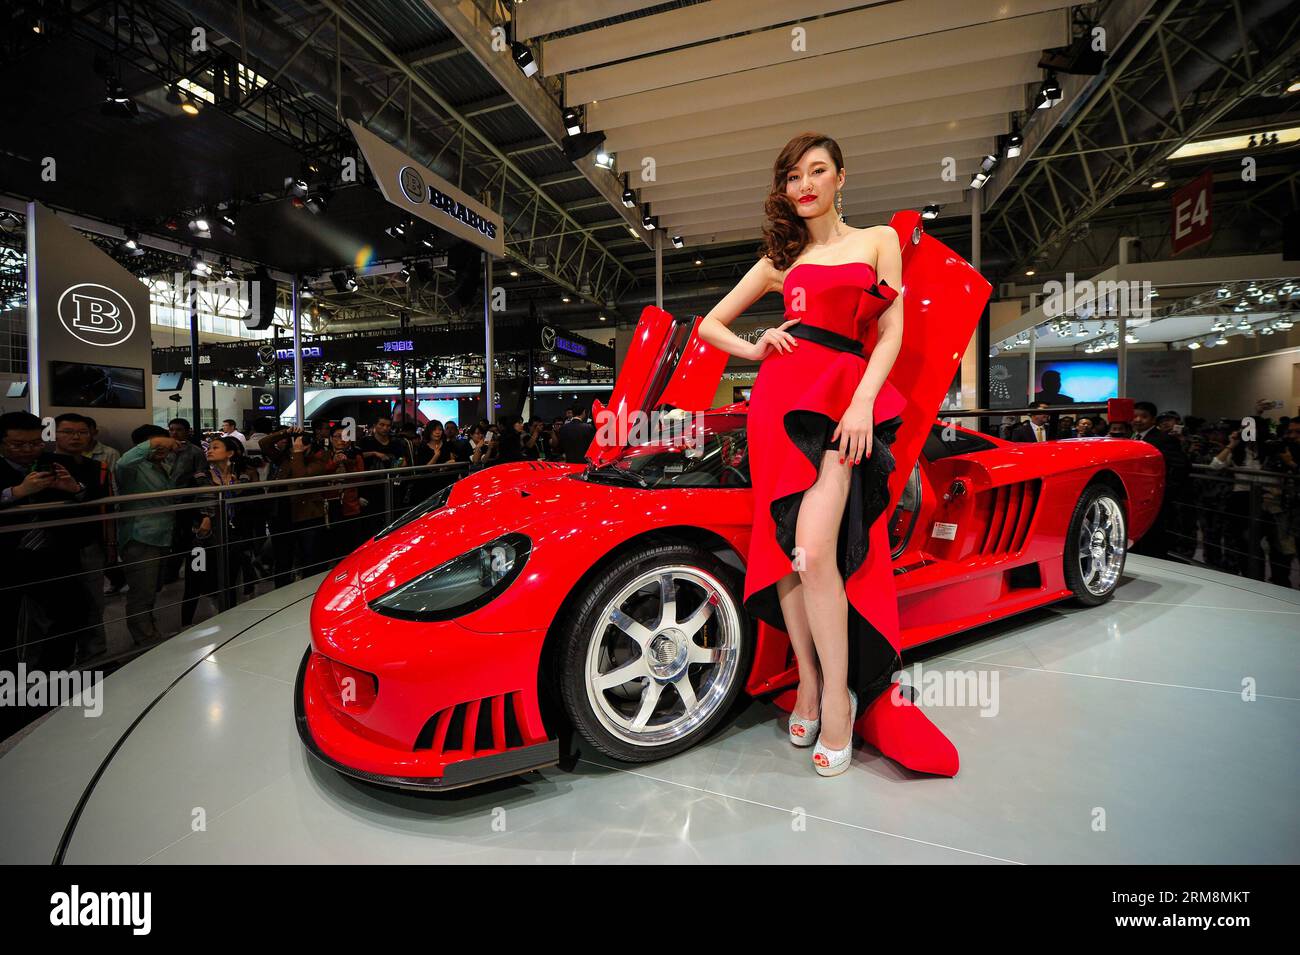 (140420) -- BEIJING, April 20, 2014 (Xinhua) -- A model presents a WM Saleen S7 sports car during the media preview of the 2014 Beijing International Automotive Exhibition in Beijing, China, April 20, 2014. Boasting 410 km/h top speed, the car is driven by a V8 7.0 liter engine producing 1060 horsepower and goes from 0 to 100 km/h in 2.4 seconds. The auto show will be held on April 21-29, attracting over 2,000 exhibitors from 14 countries and regions. (Xinhua/Yang Guang) (hdt) CHINA-BEIJING-AUTO-EXHIBITION (CN) PUBLICATIONxNOTxINxCHN   Beijing April 20 2014 XINHUA a Model Presents a World Cup Stock Photo